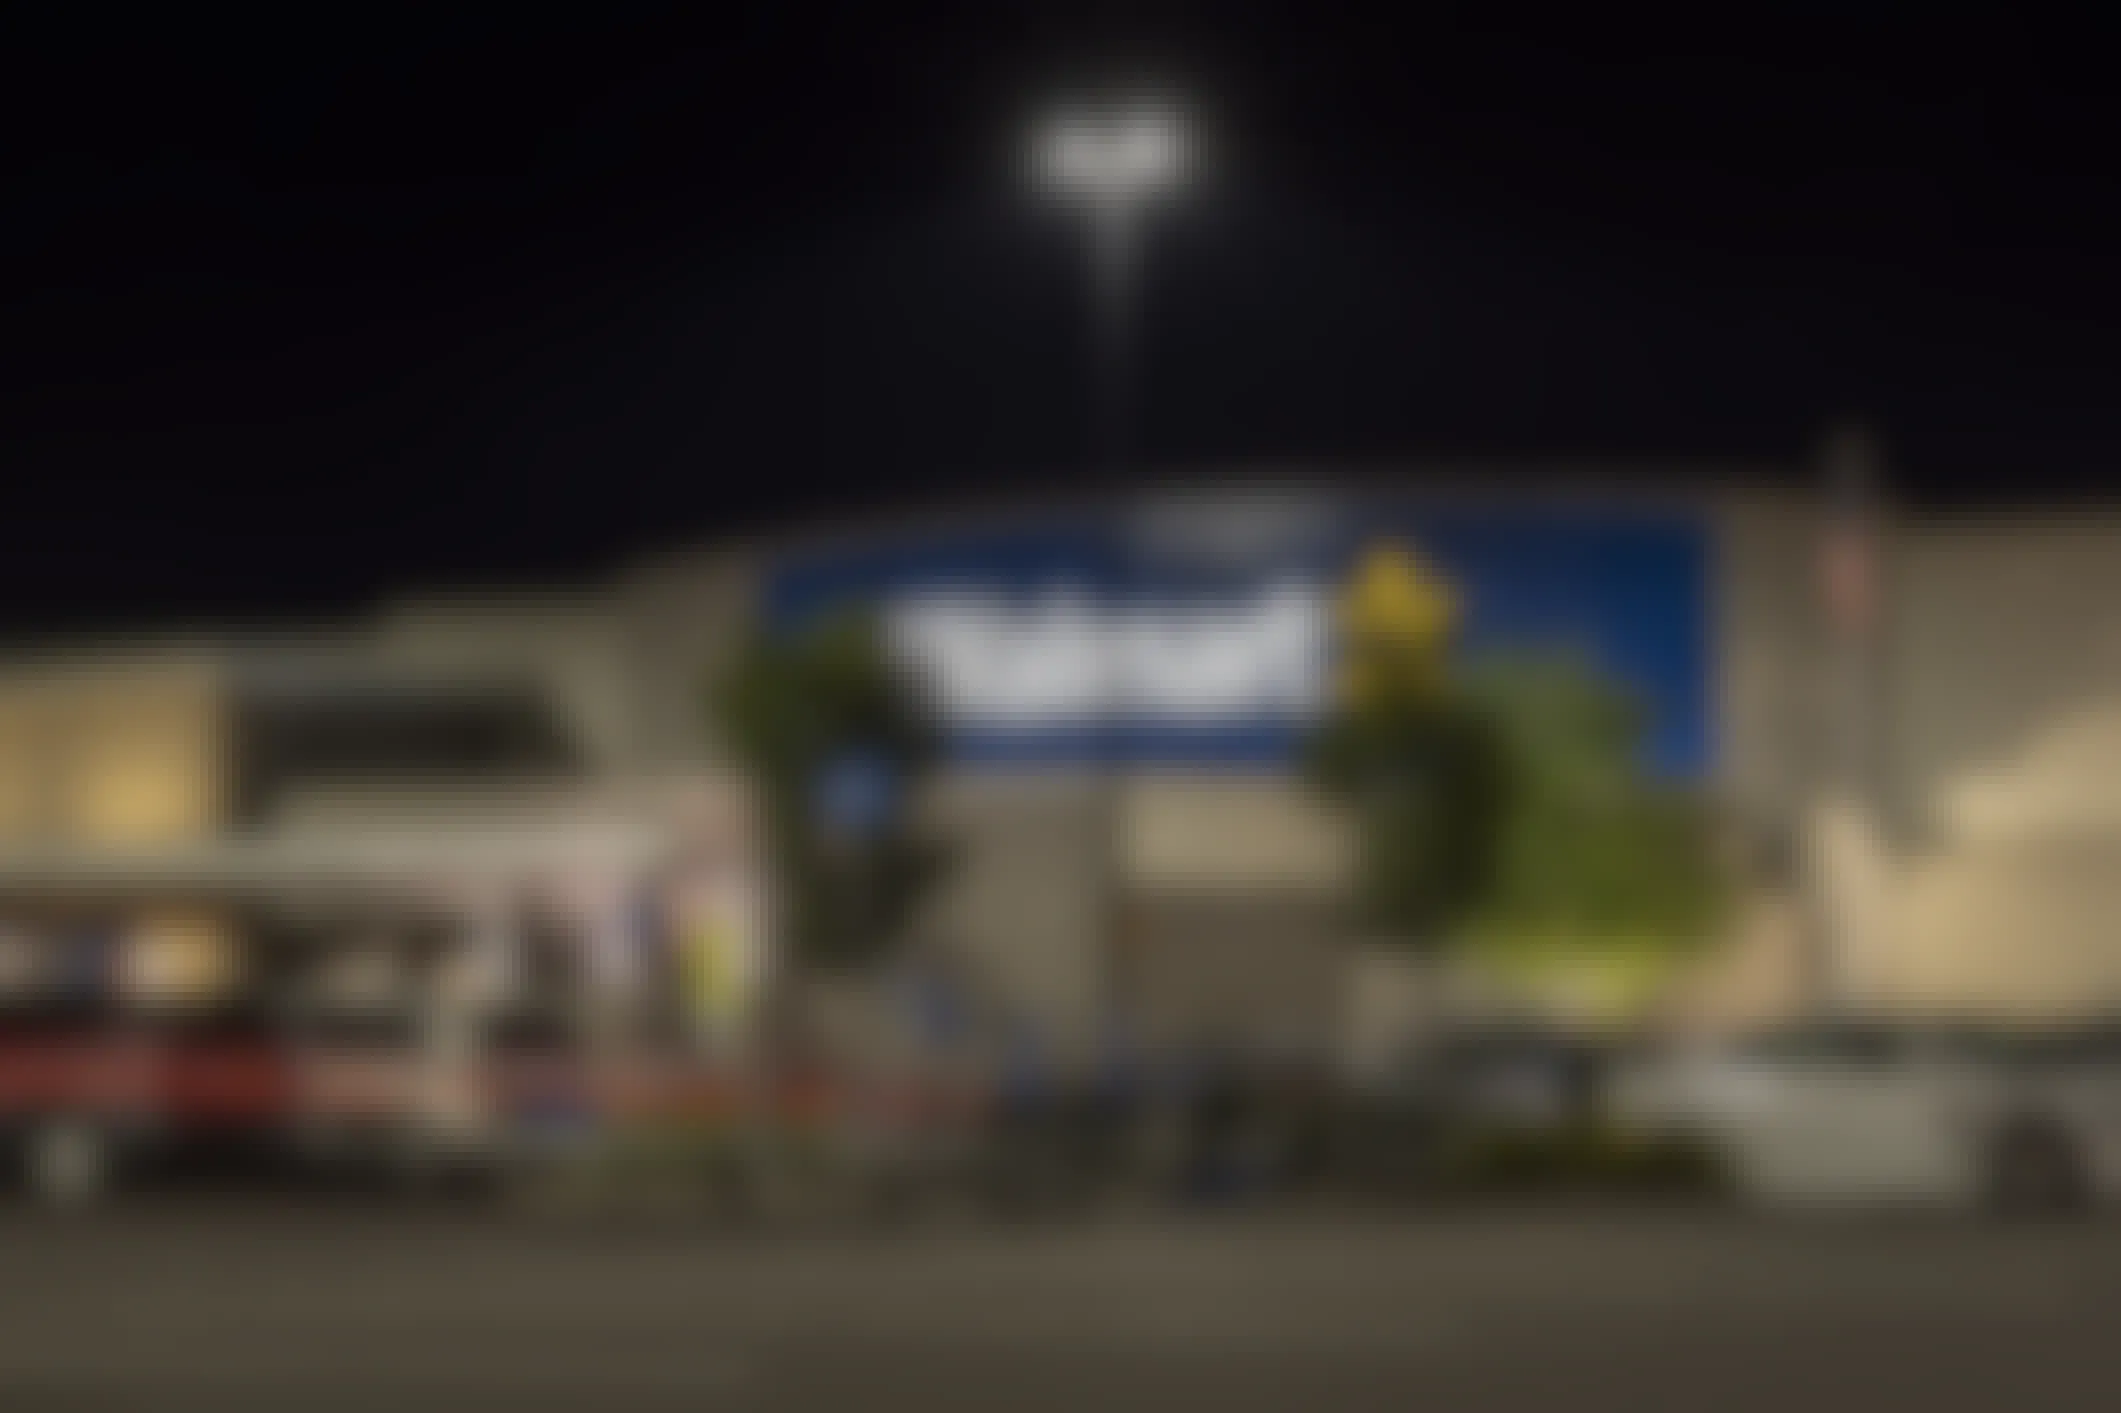 A Walmart storefront at nightime.